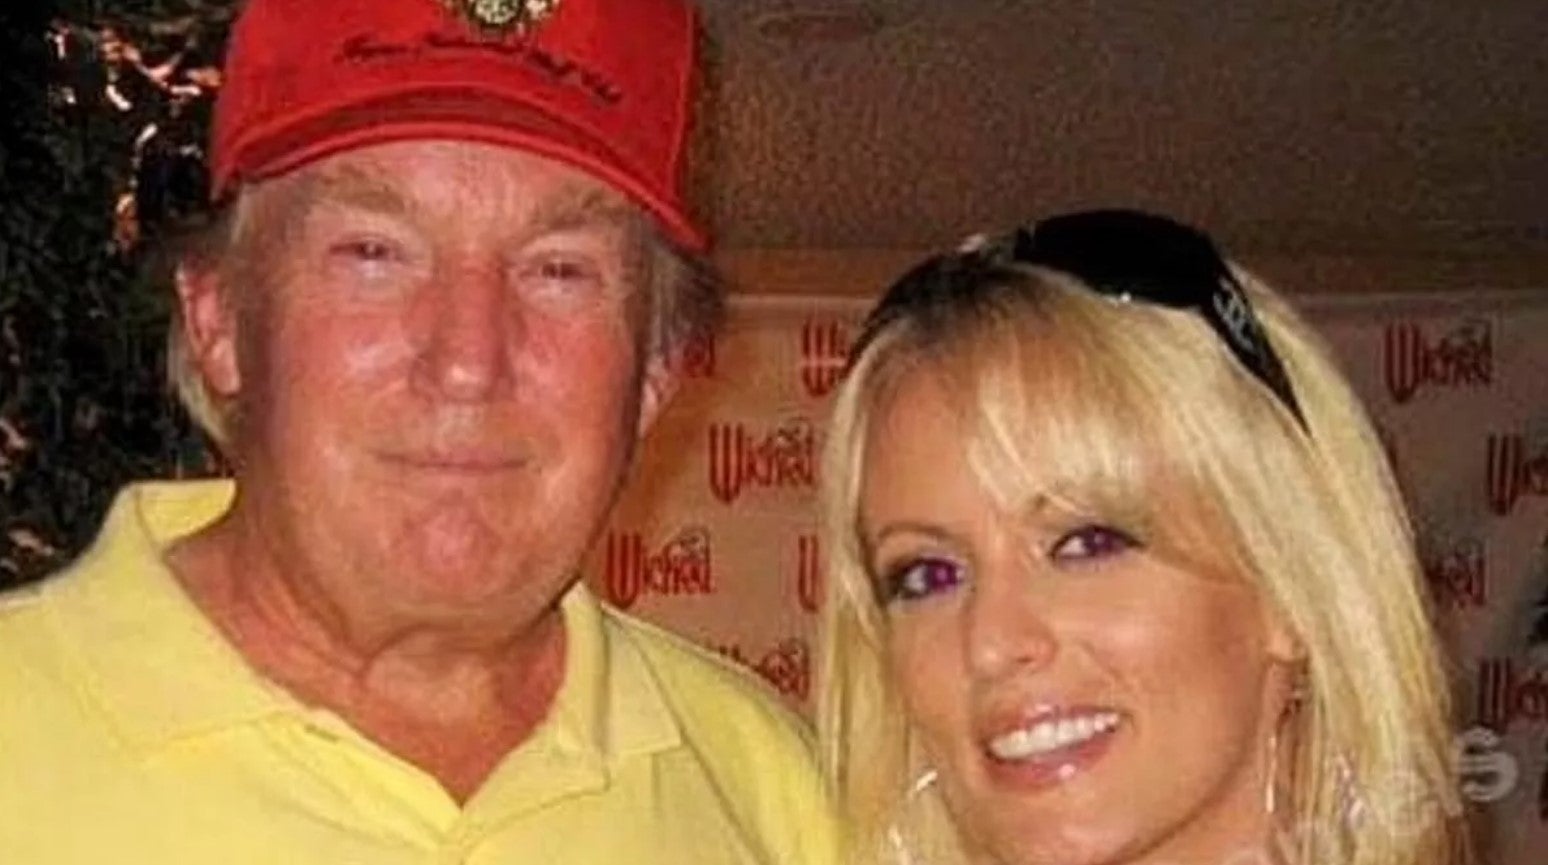 Trump and Daniels posing for a photo in 2006